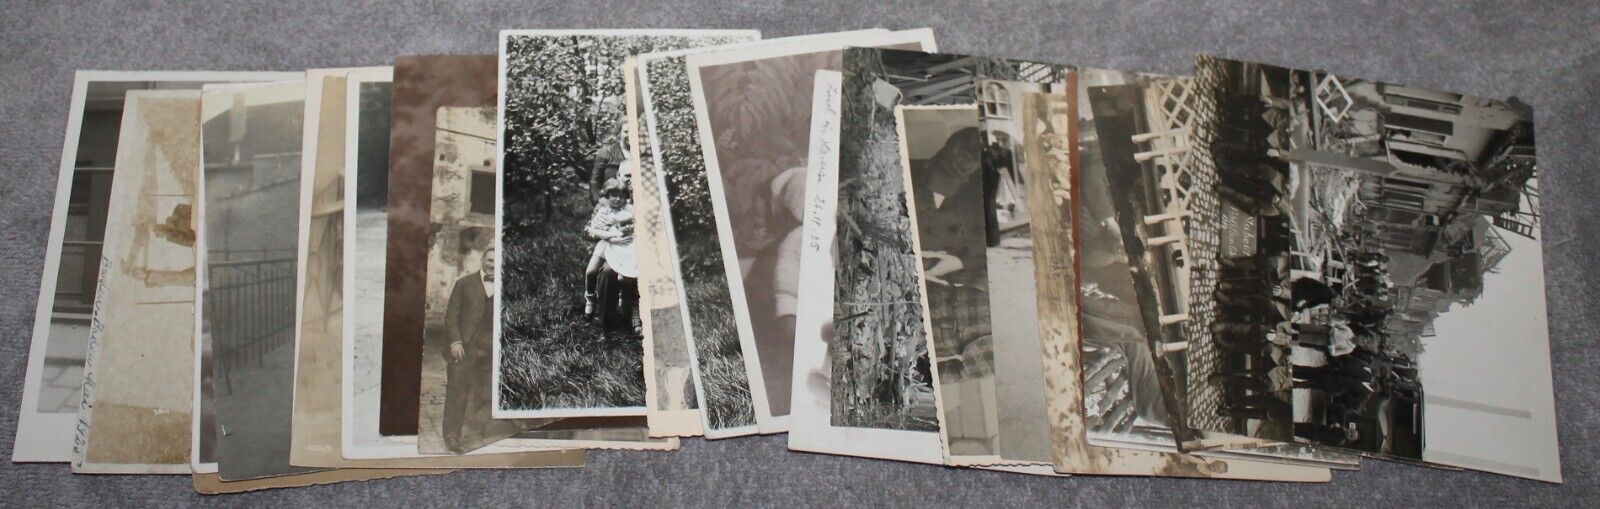 RPPC PHOTOS LOT 25 WWI GERMANY WEALTHY JEWISH FAMILY WHO ESCAPED THE HOLOCAUST